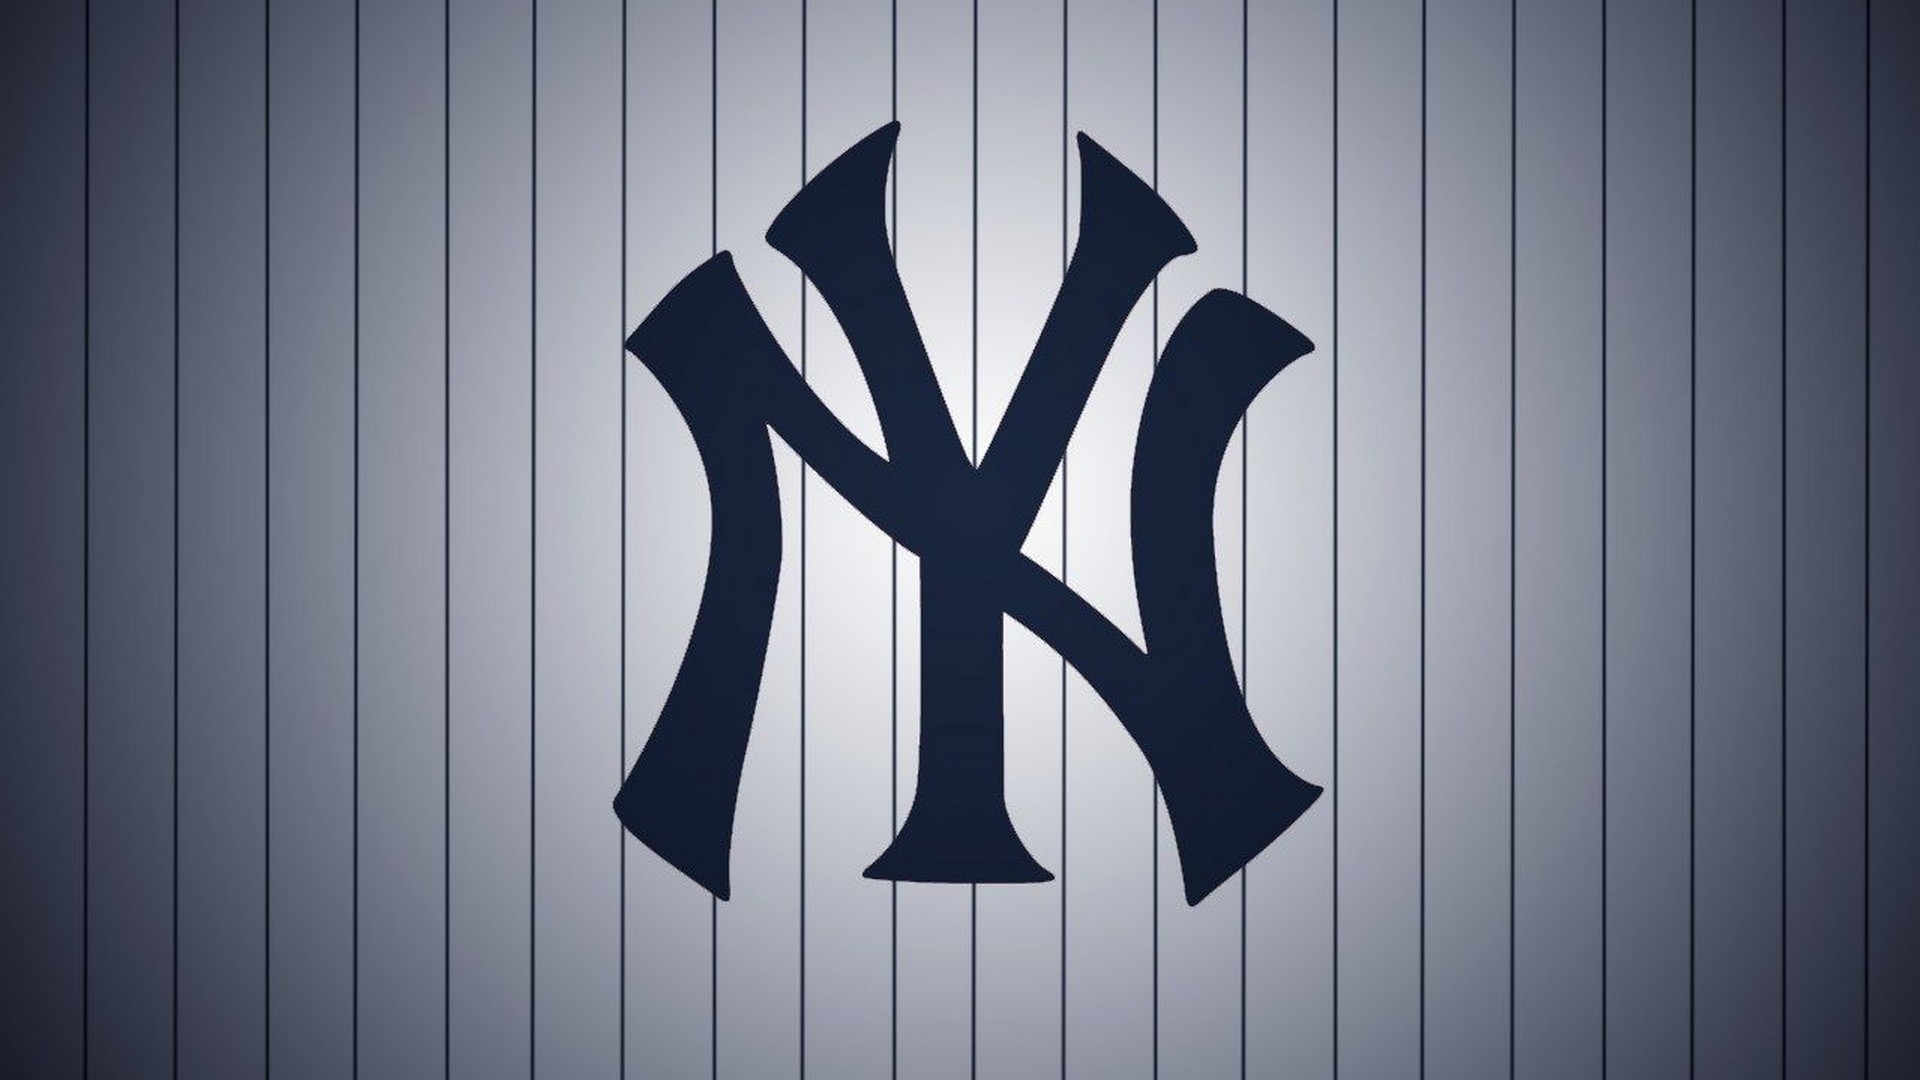 HD Backgrounds New York Yankees with high-resolution 1920x1080 pixel. You can use this wallpaper for Mac Desktop Wallpaper, Laptop Screensavers, Android Wallpapers, Tablet or iPhone Home Screen and another mobile phone device